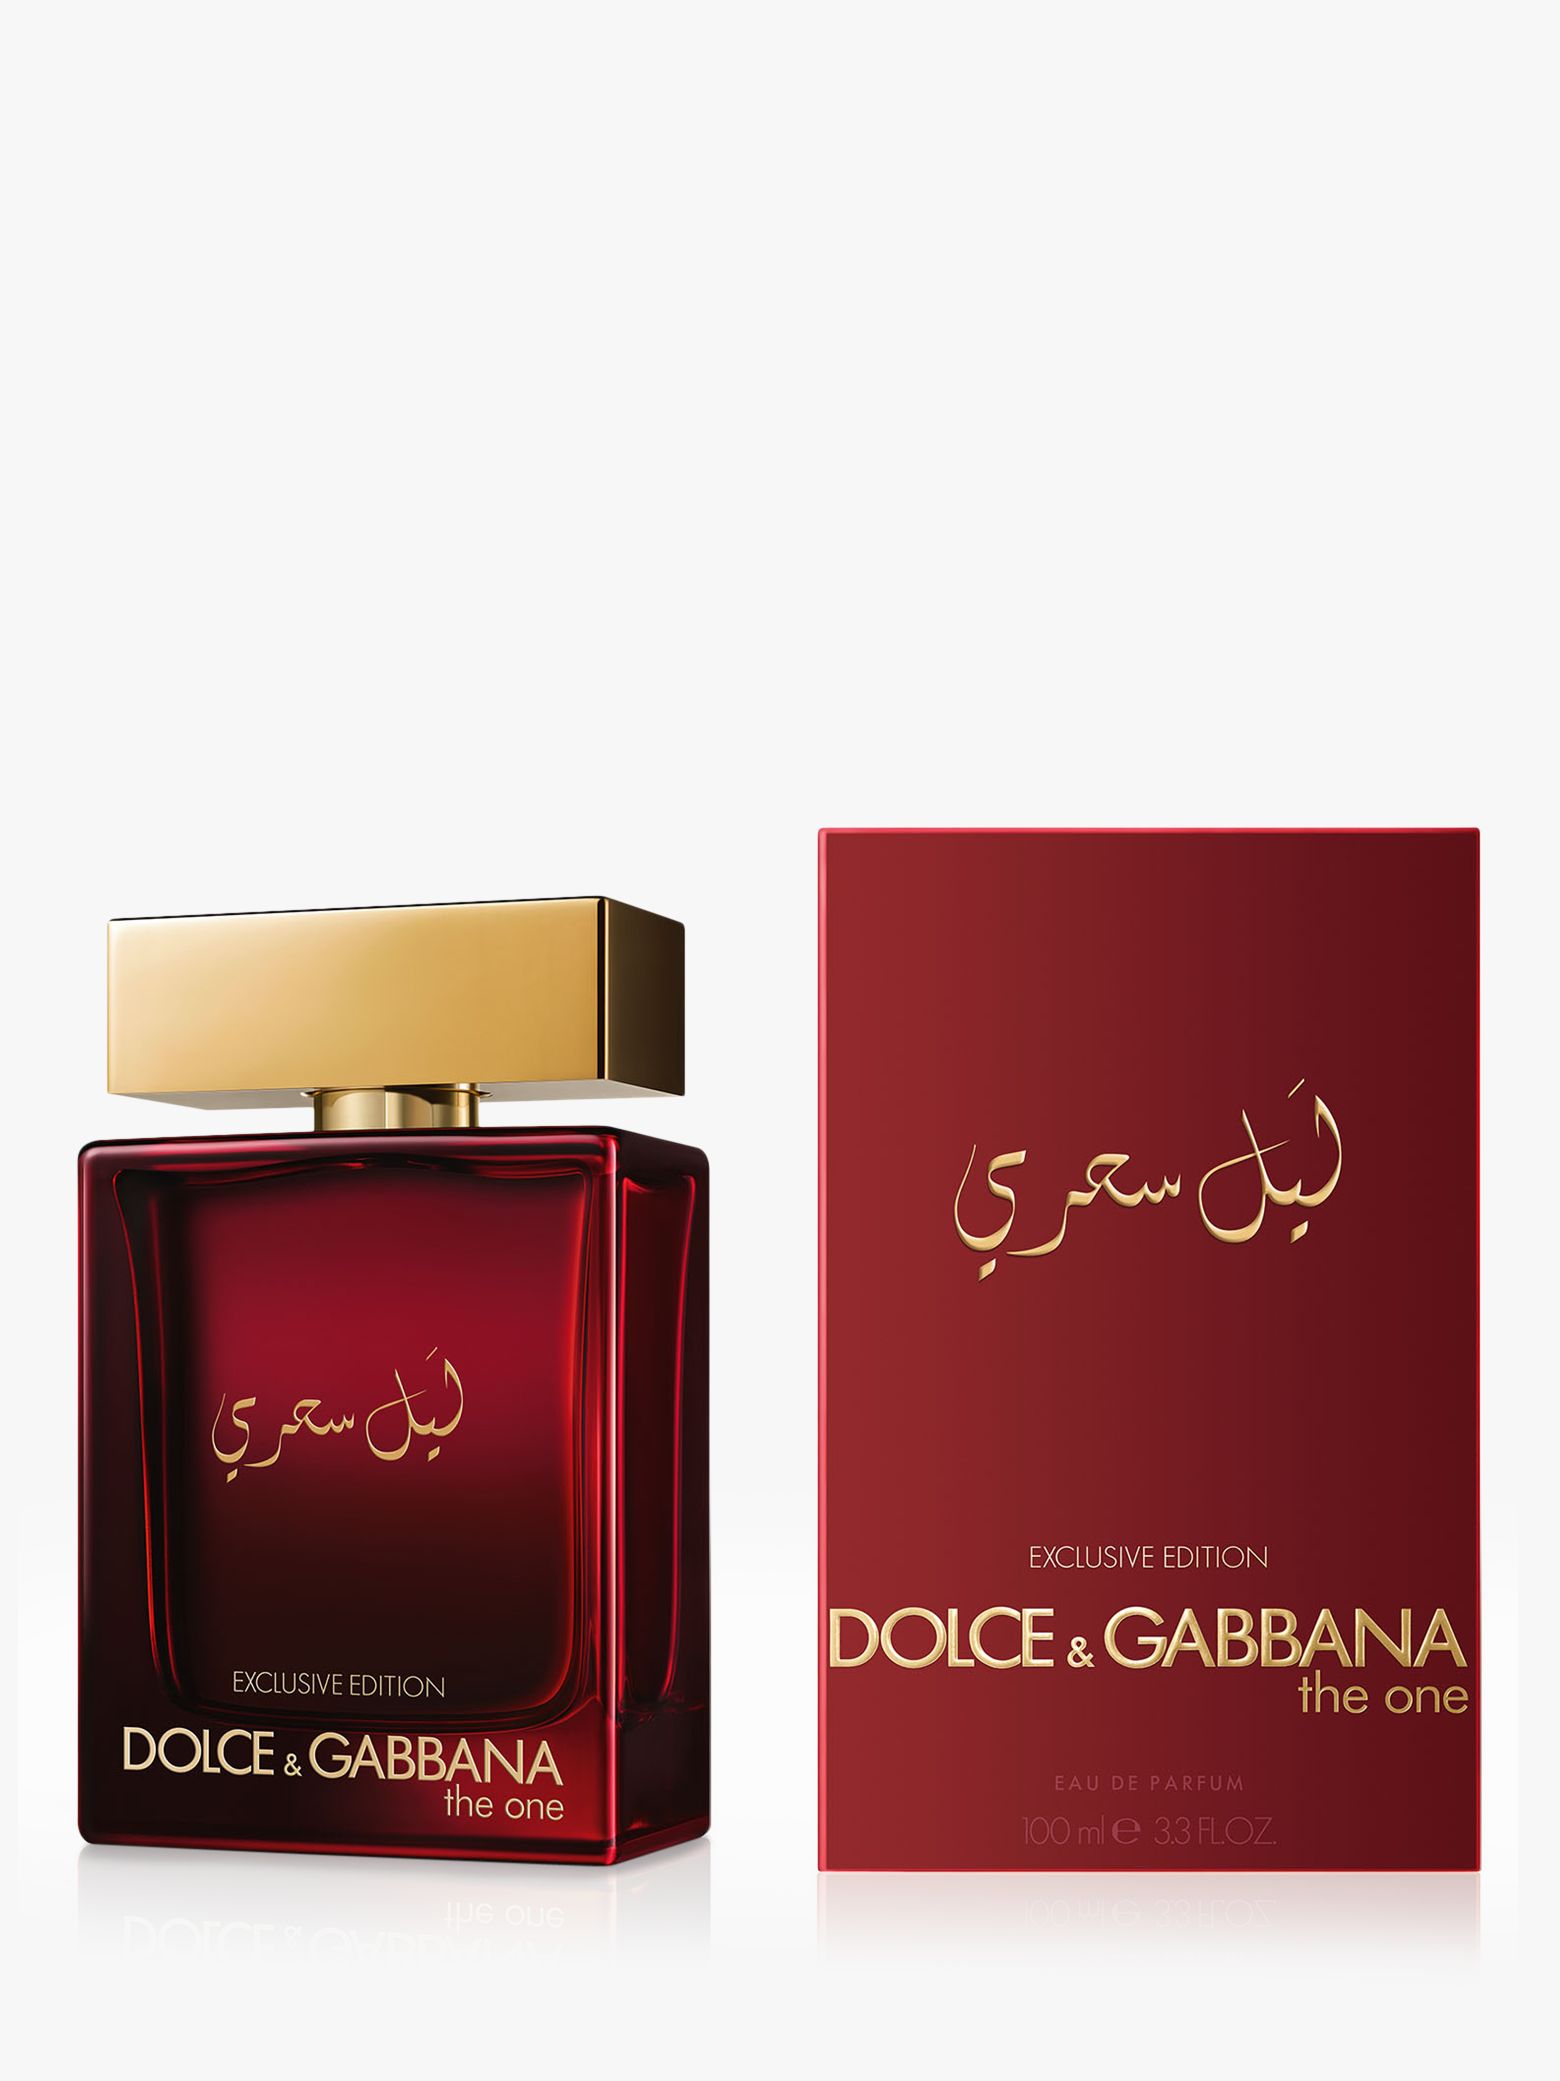 dolce and gabbana the one perfume review